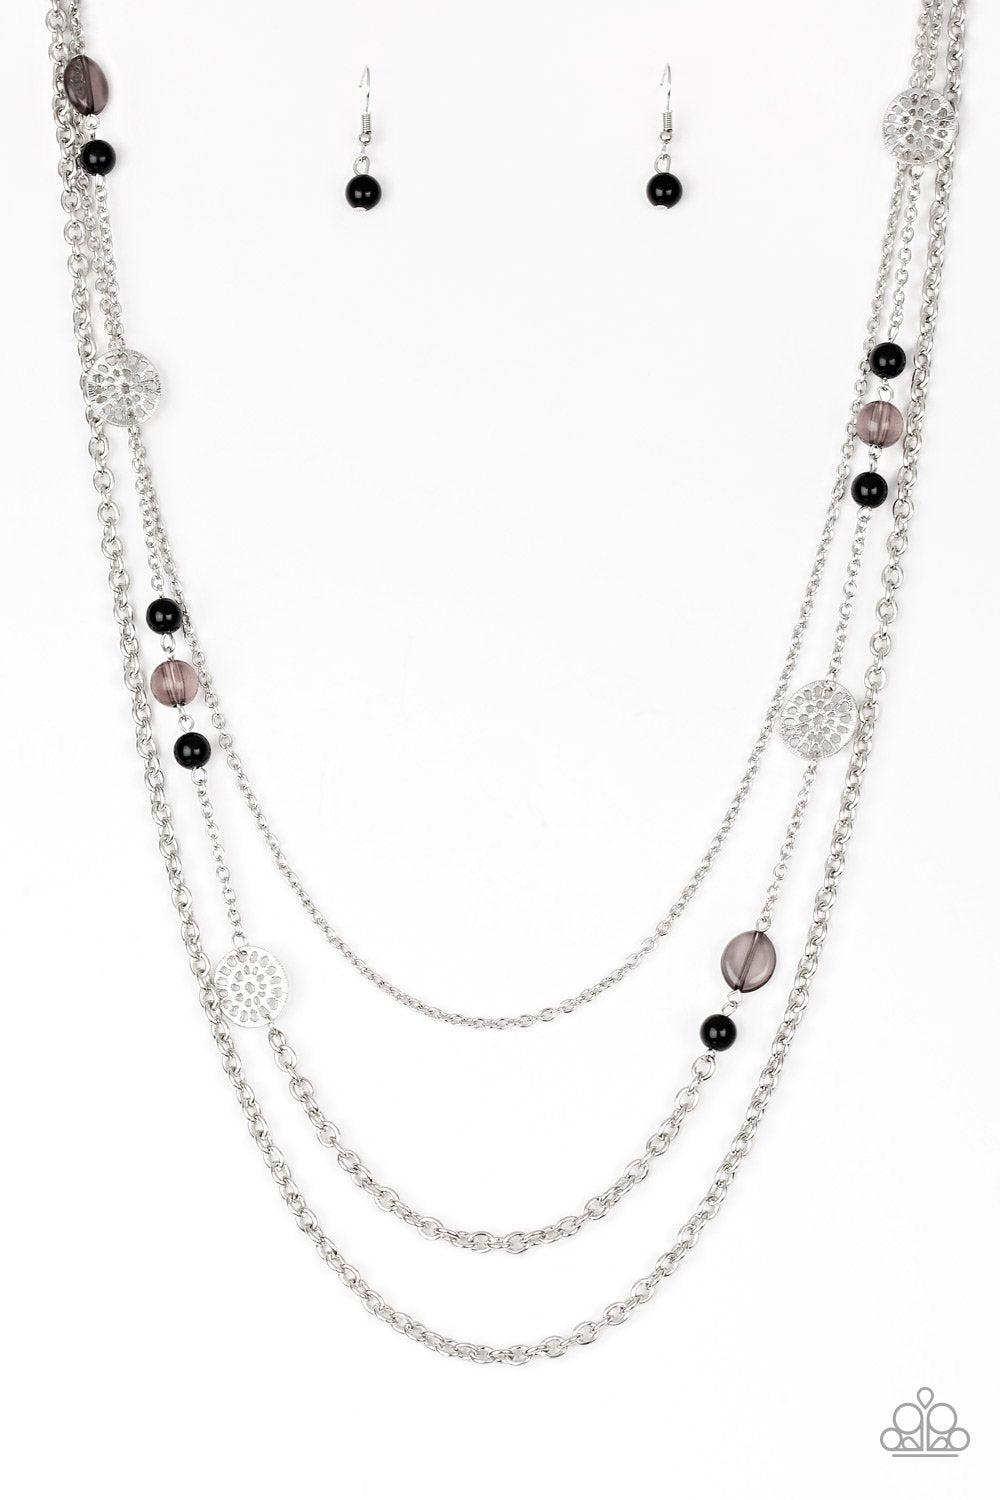 Pretty Pop-tastic! Black and Silver Necklace and matching Earrings - Paparazzi Accessories-CarasShop.com - $5 Jewelry by Cara Jewels